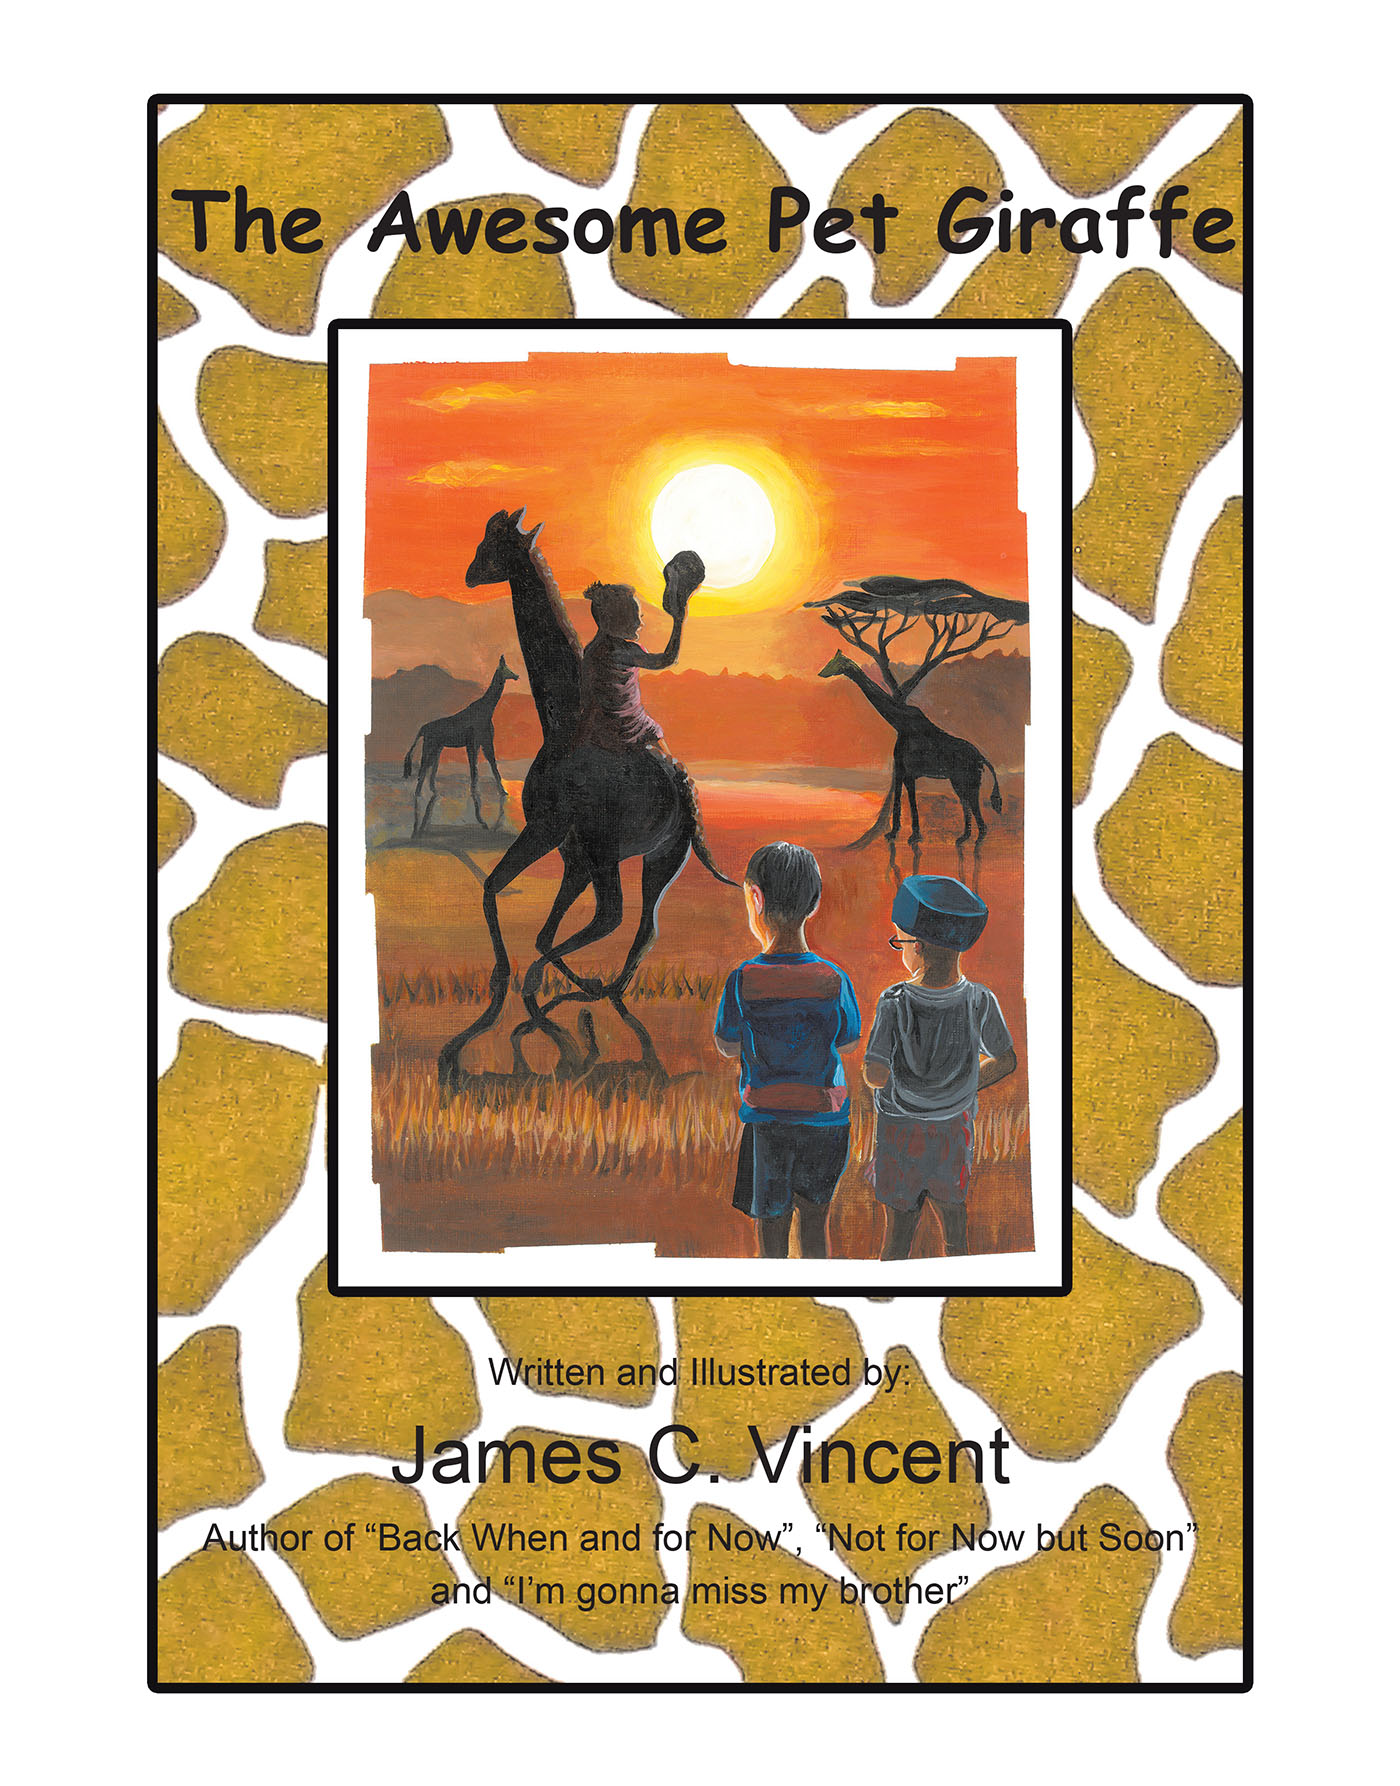 James C. Vincent’s New Book, "The Awesome Pet Giraffe," Centers Around a Young Girl Who Wants to Receive a Pet Giraffe More Than Anything in the World for Her Birthday